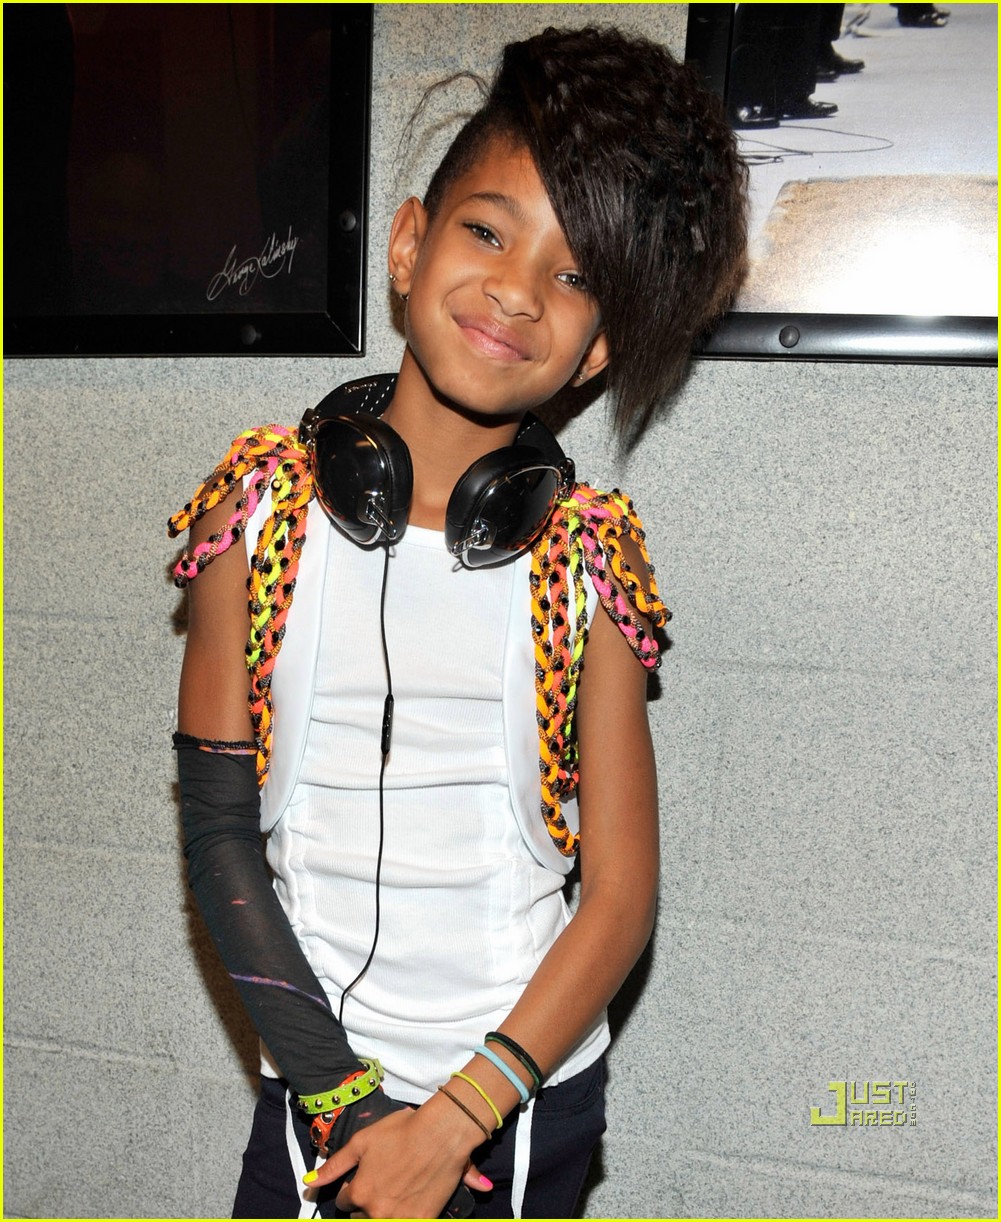 Willow Smith - 'Whip My Hair' Song Leak: Photo 2478251 | Celebrity Babies,  Jada Pinkett Smith, Will Smith, Willow Smith Pictures | Just Jared